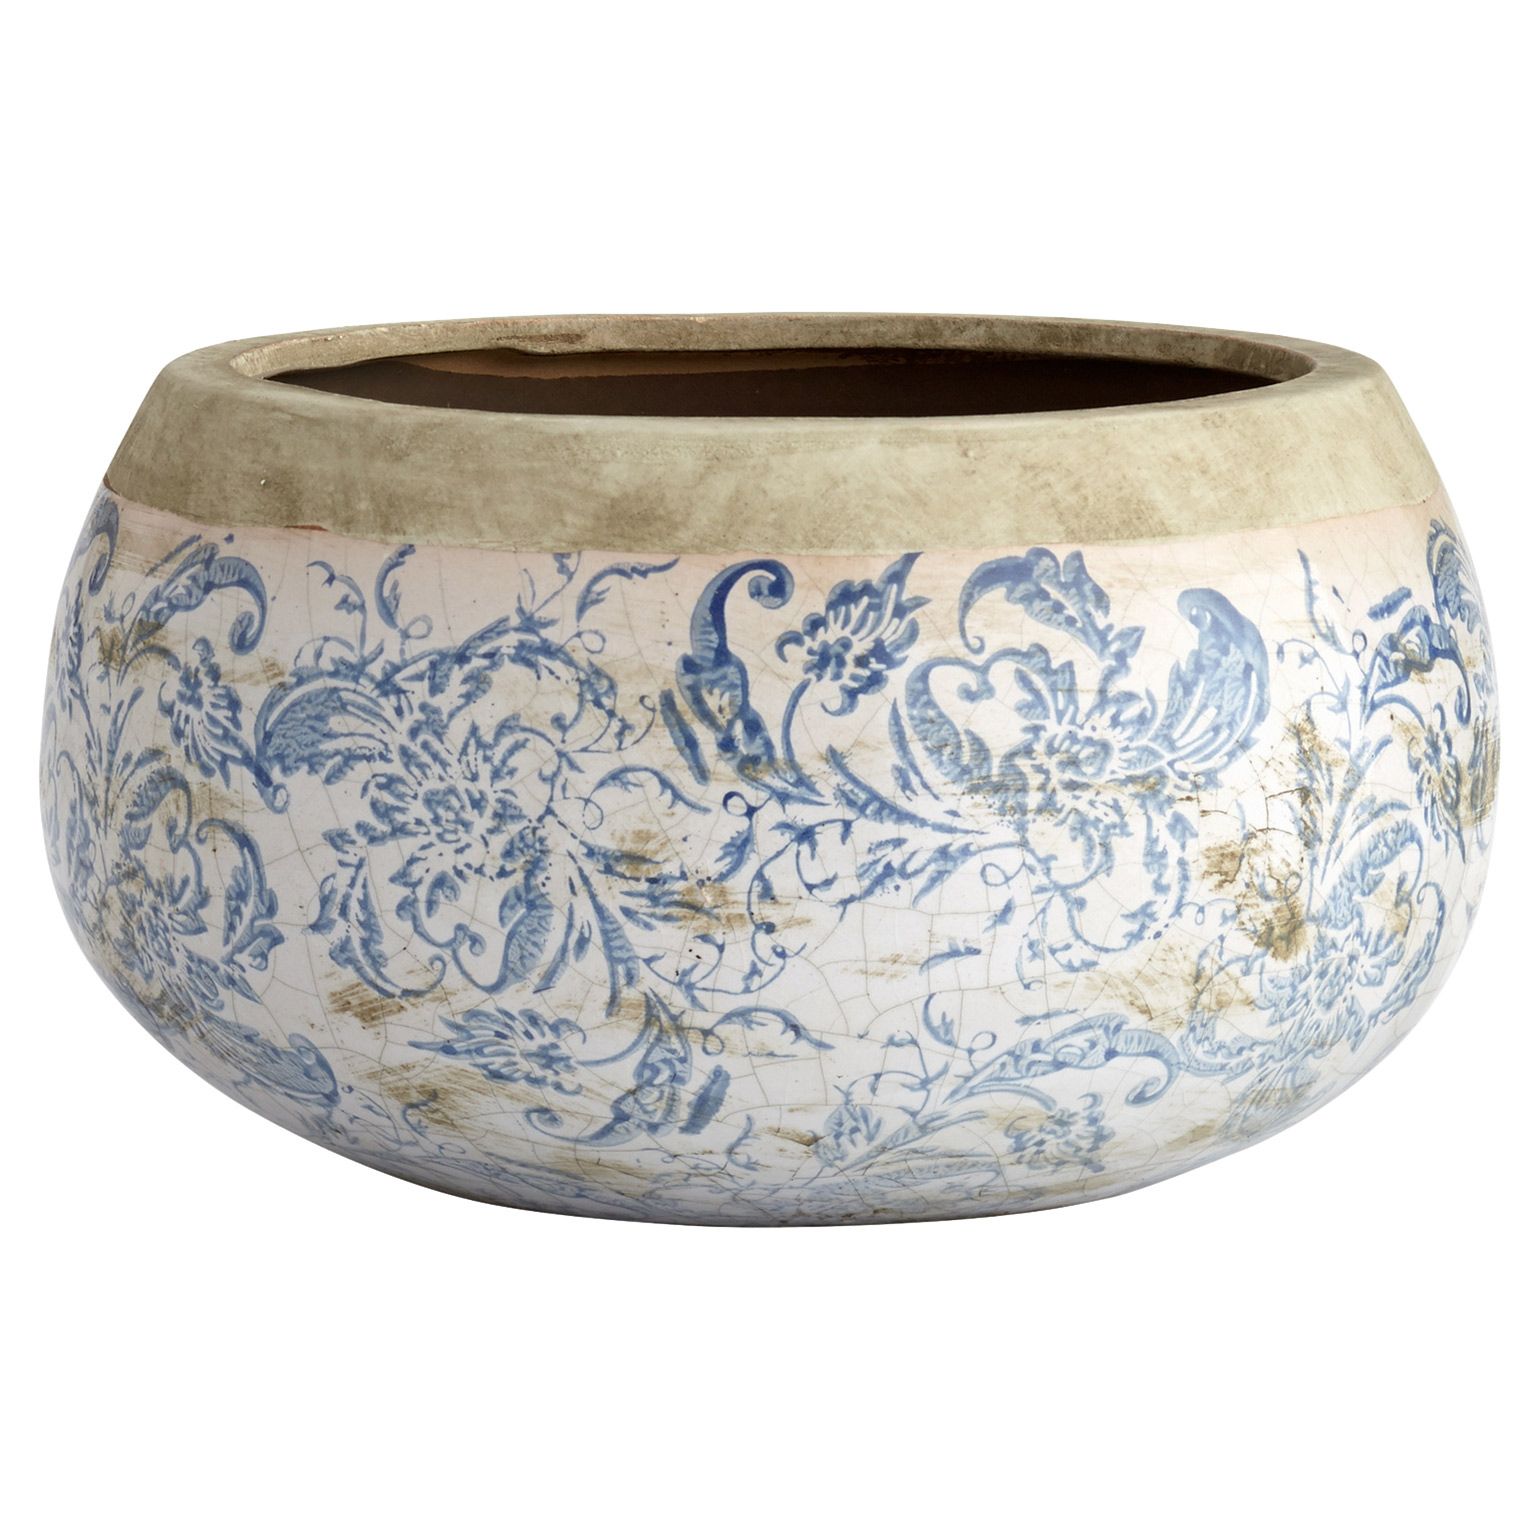 Isela Modern Classic Blue Accent White Crackle Terracotta Round Planter - Large